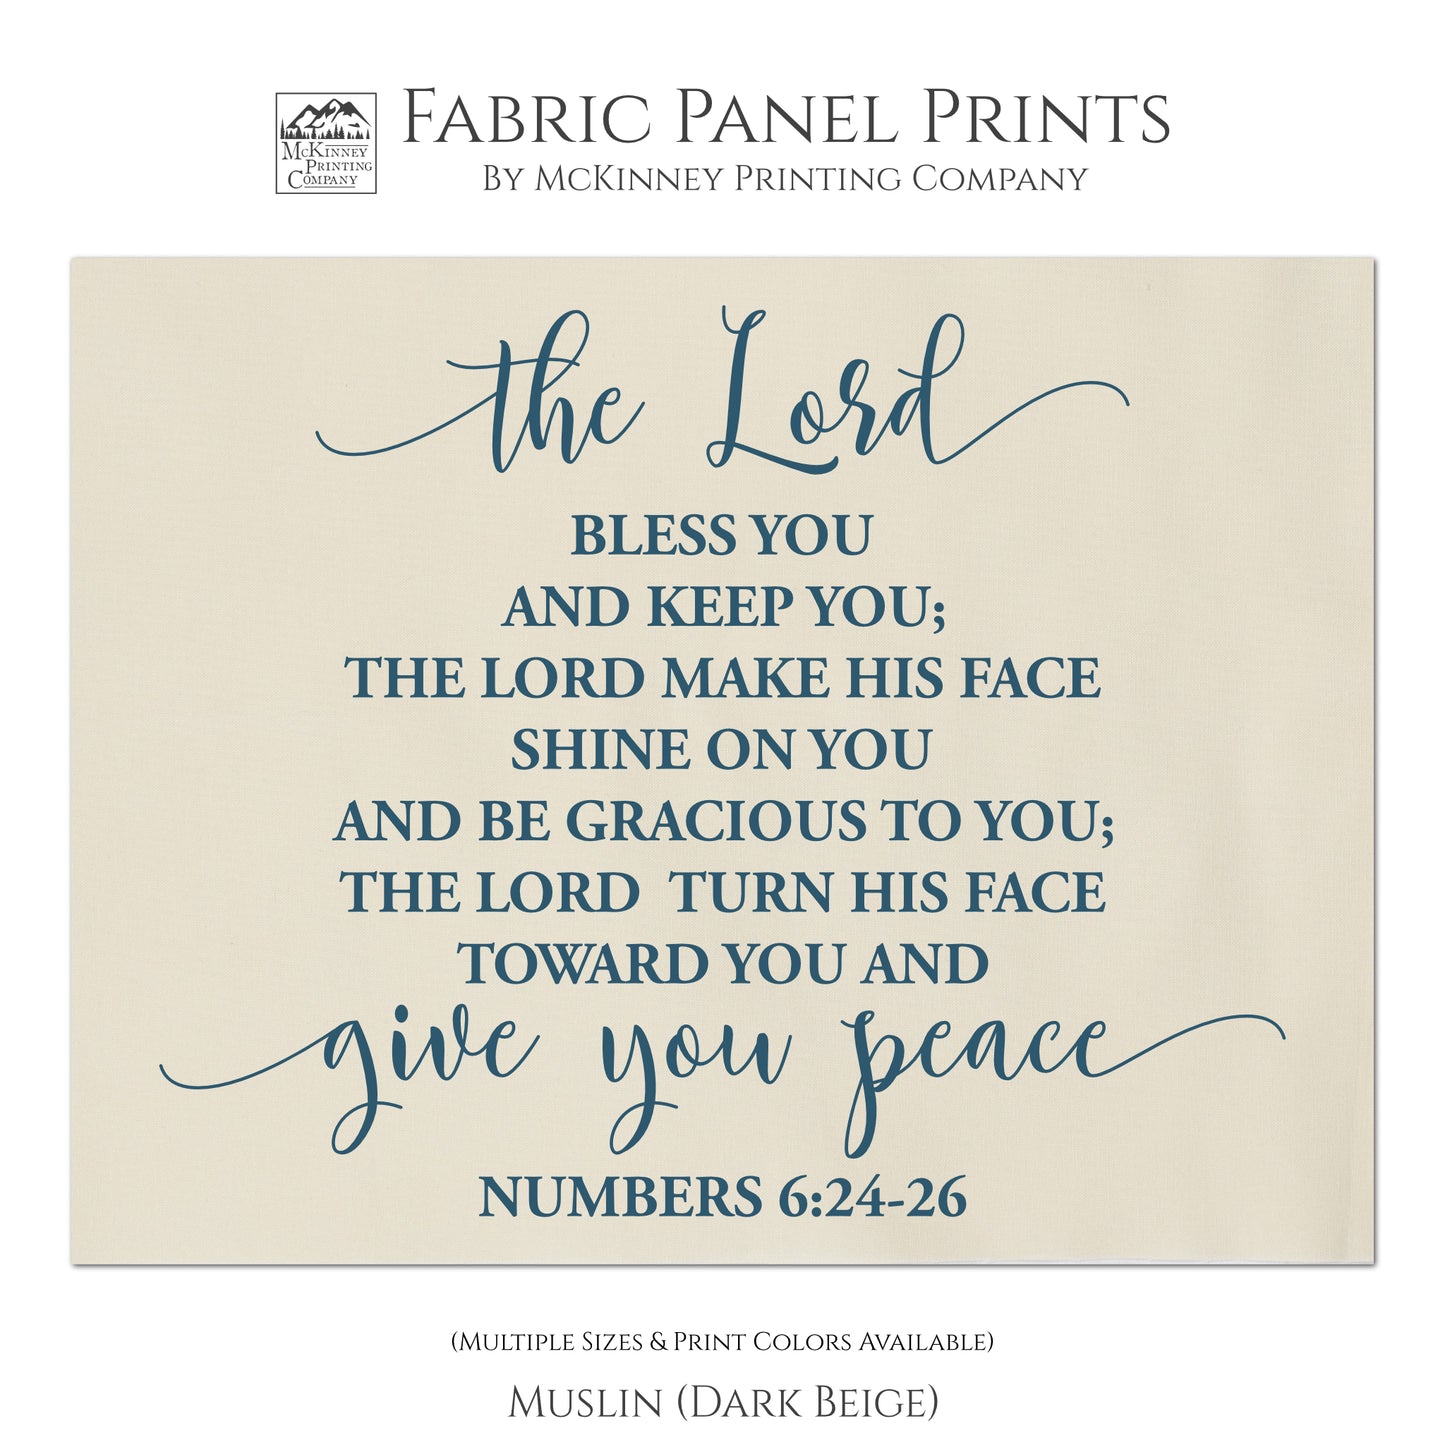 Numbers 6:24-26 - The Lord bless you and keep you; The Lord make His face shine on you and be gracious to you; The Lord turn his face toward you and give you peace. - Fabric Panel Print, Quilt Block - Muslin